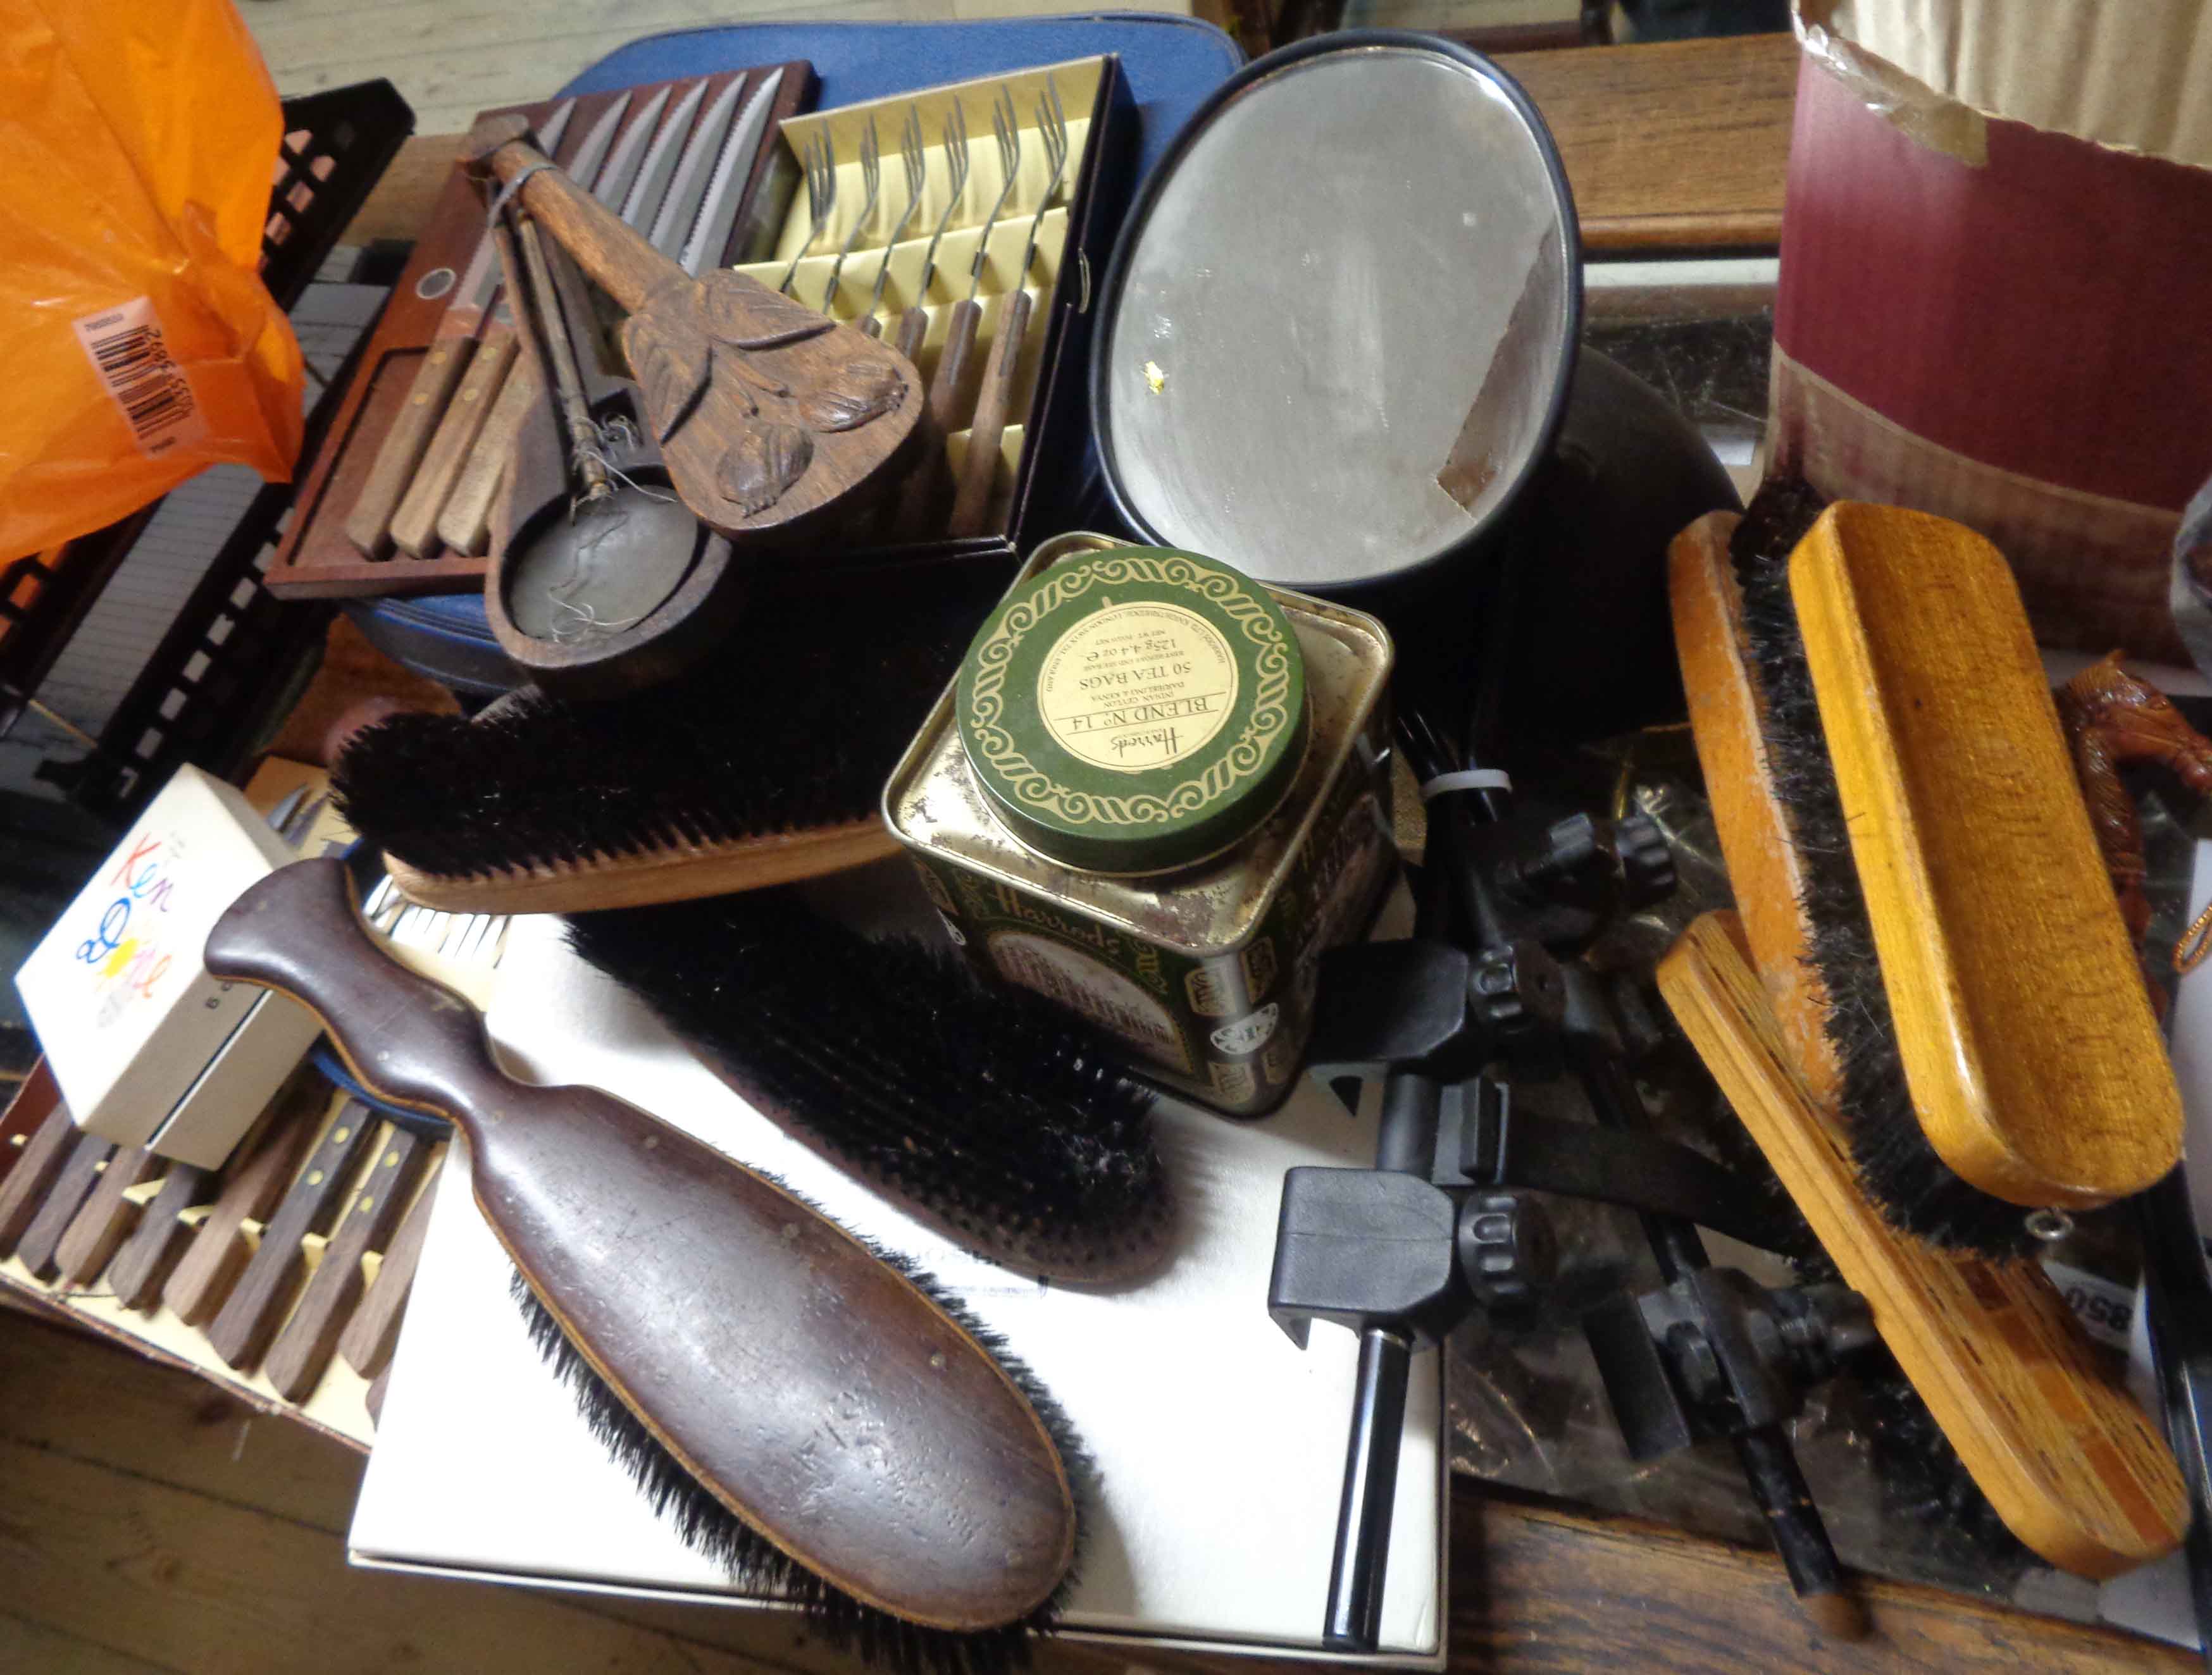 A box containing various kitchen items including steak knives, place mats, etc. - Image 2 of 2